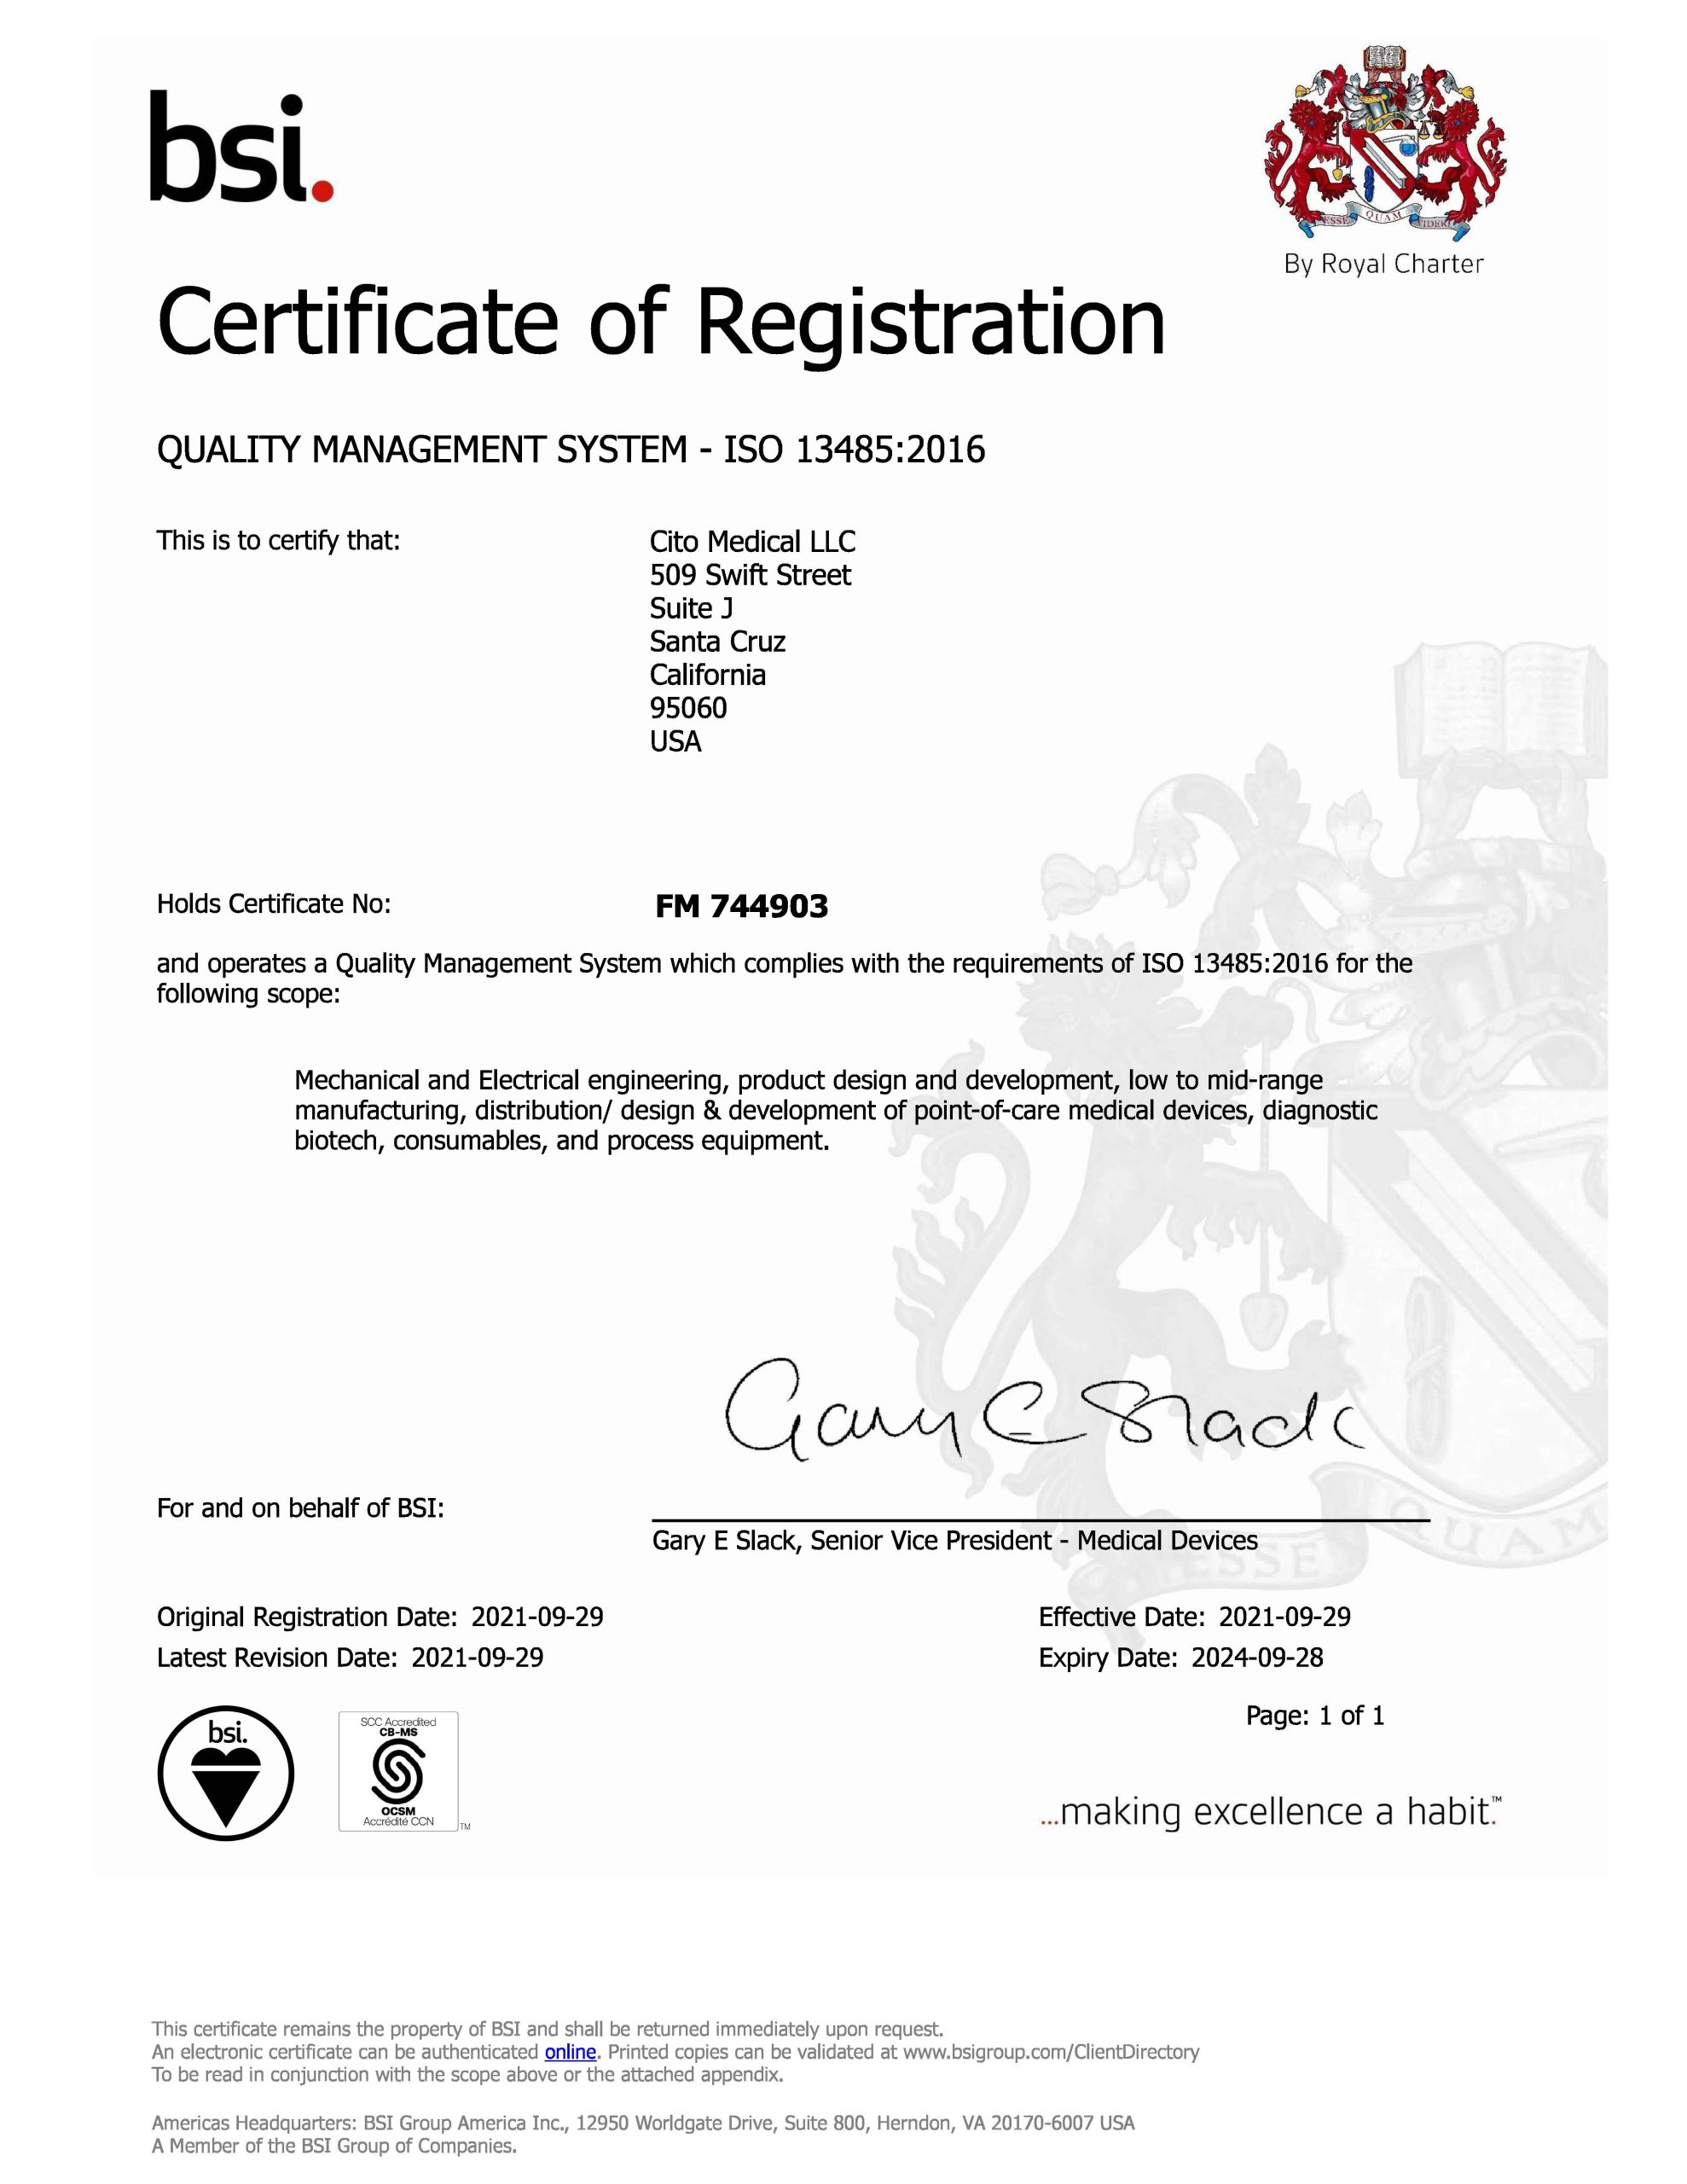 ISO 13485 Certification - Cito Medical